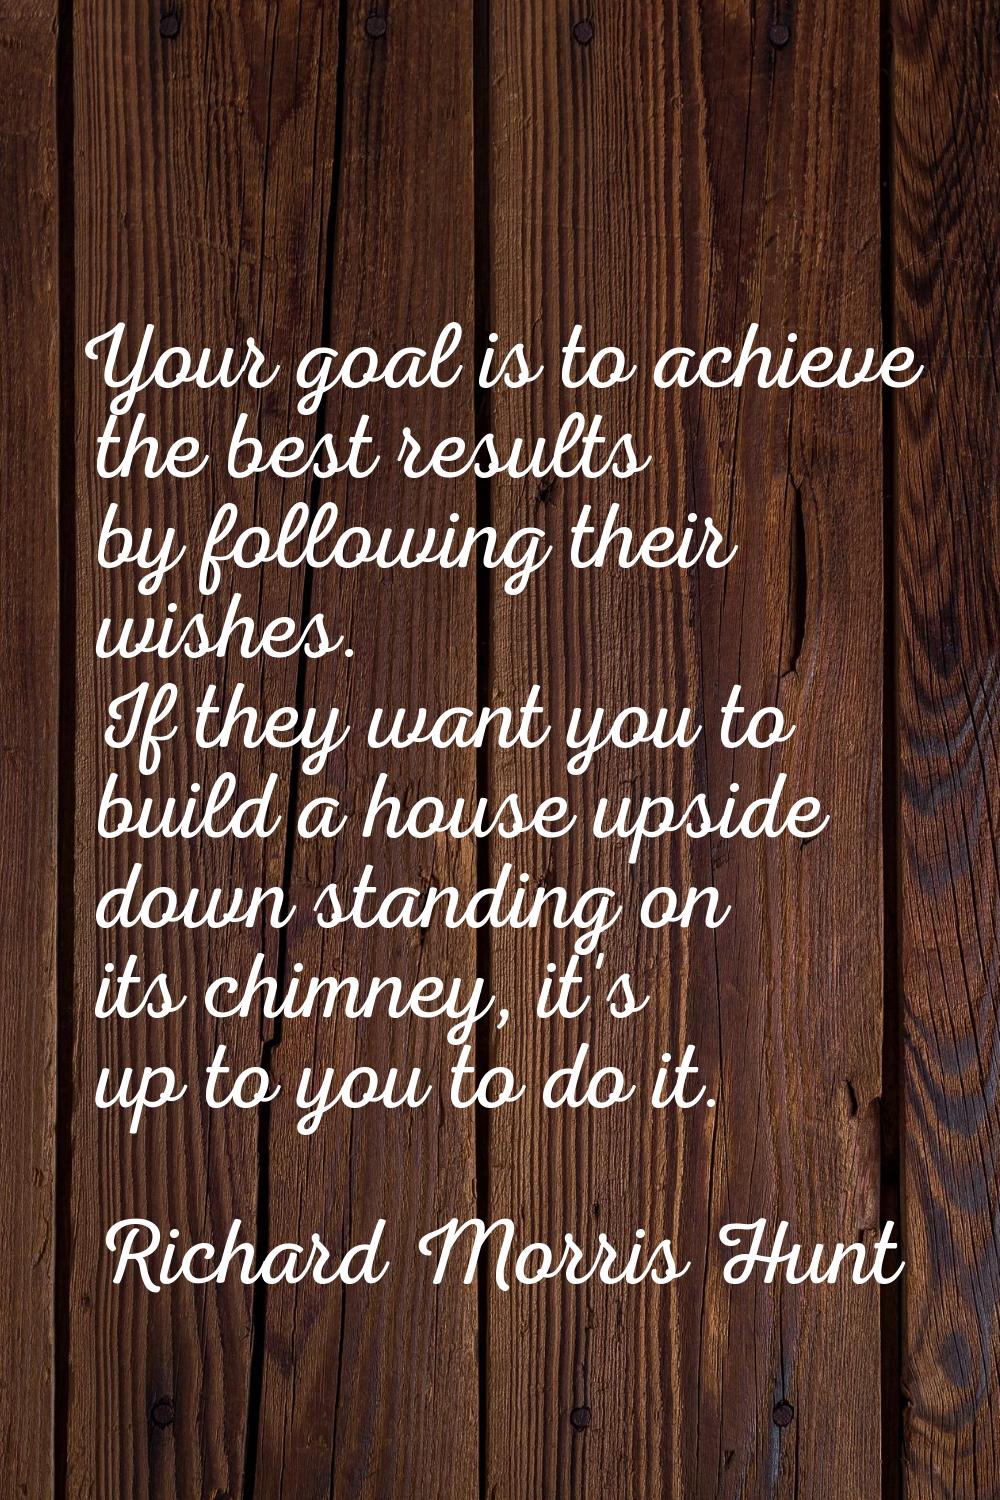 Your goal is to achieve the best results by following their wishes. If they want you to build a hou